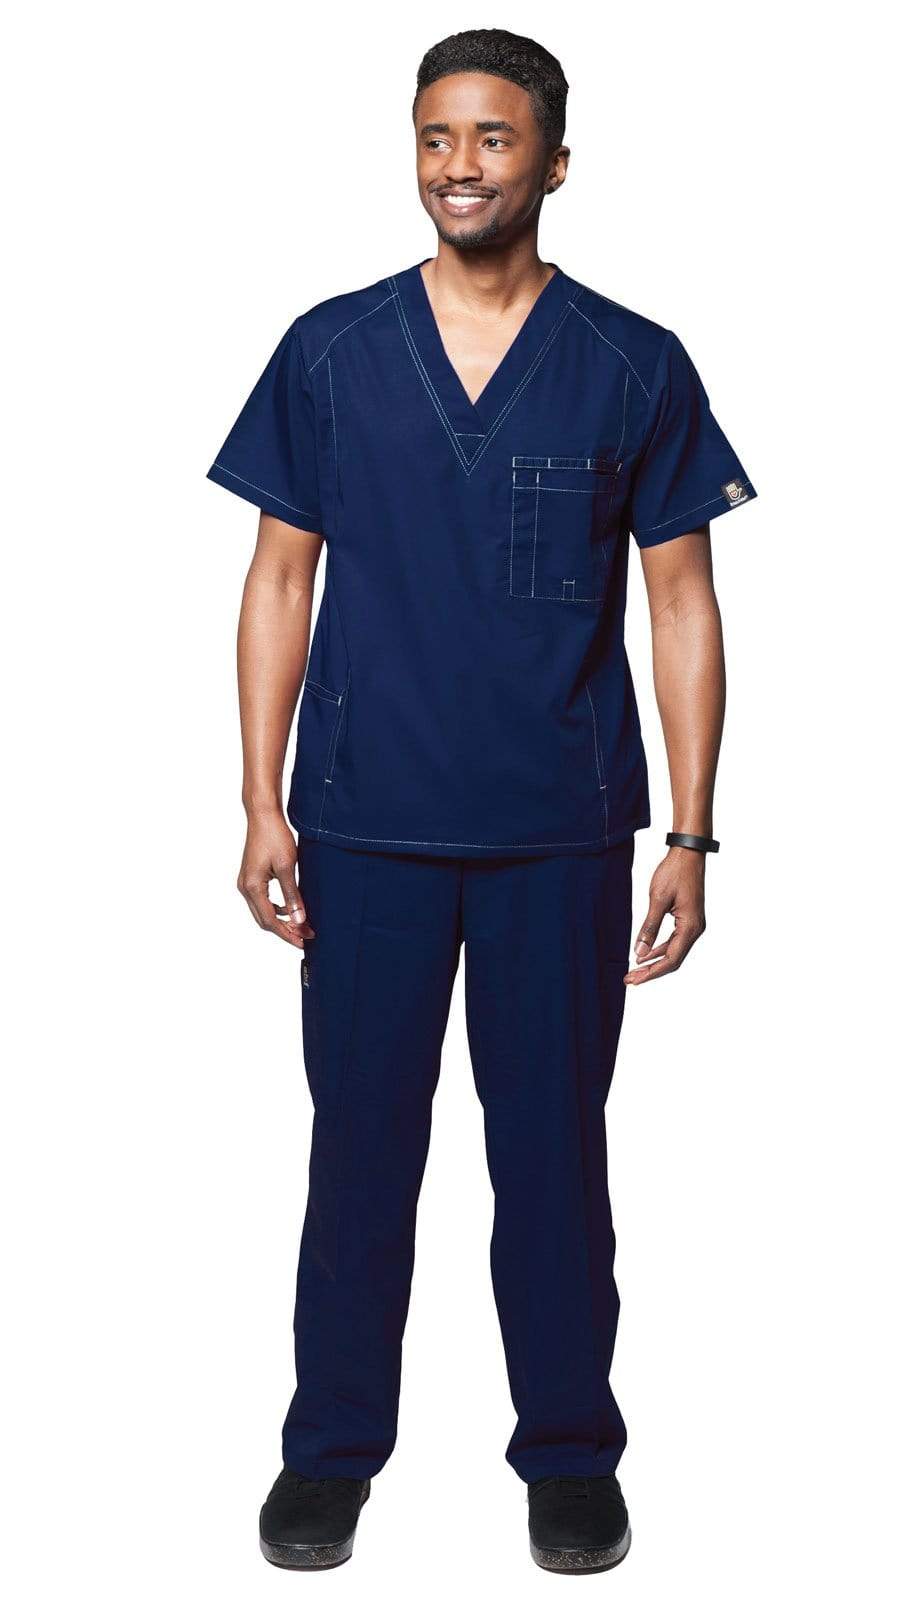 Men's Soft Medical Scrubs Outfits